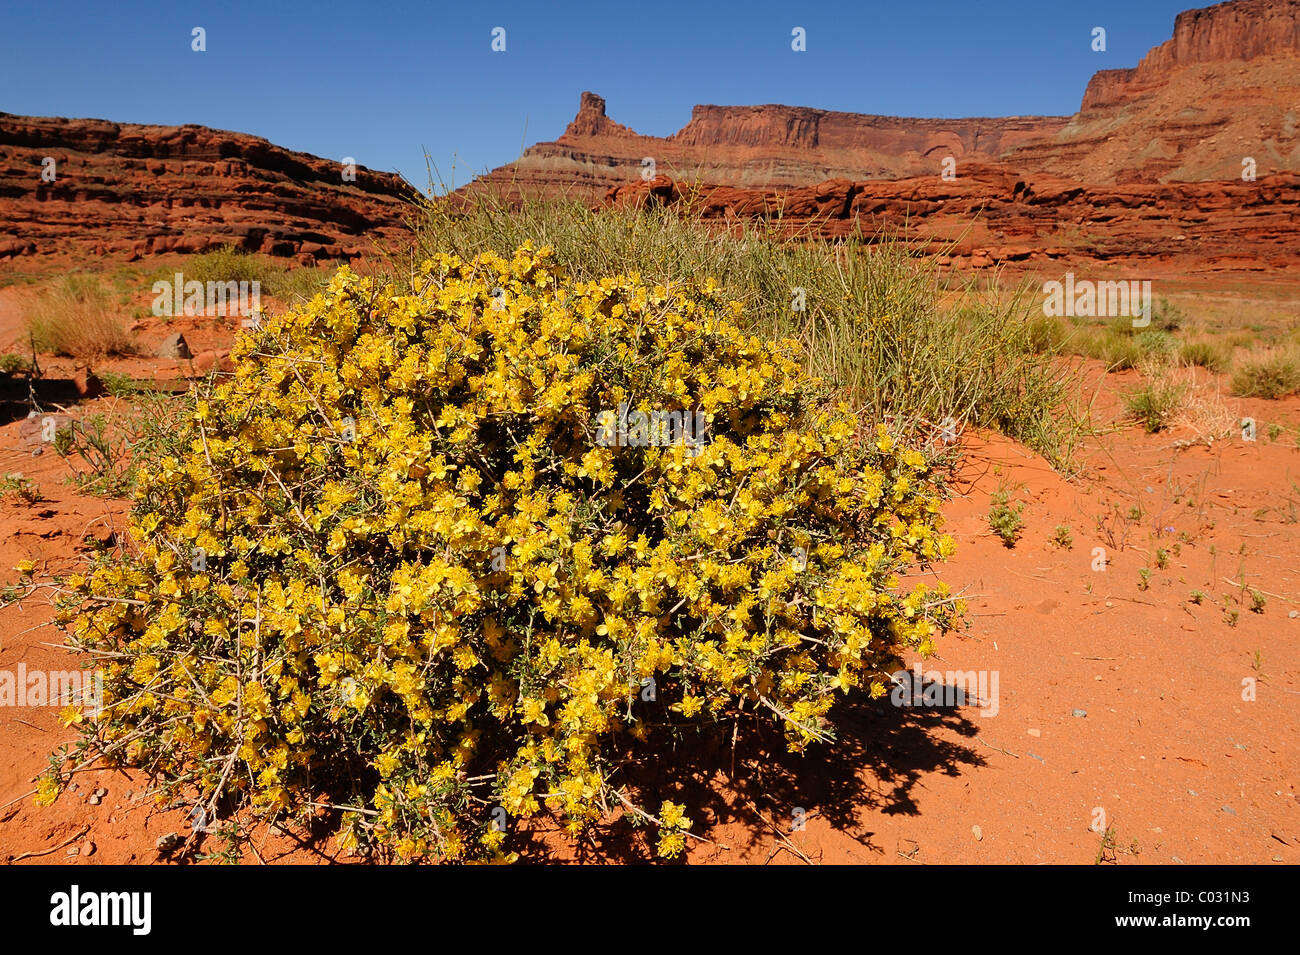 Blackbrush flowers growing in Canyonlands National Park, Utah, USA Banque D'Images